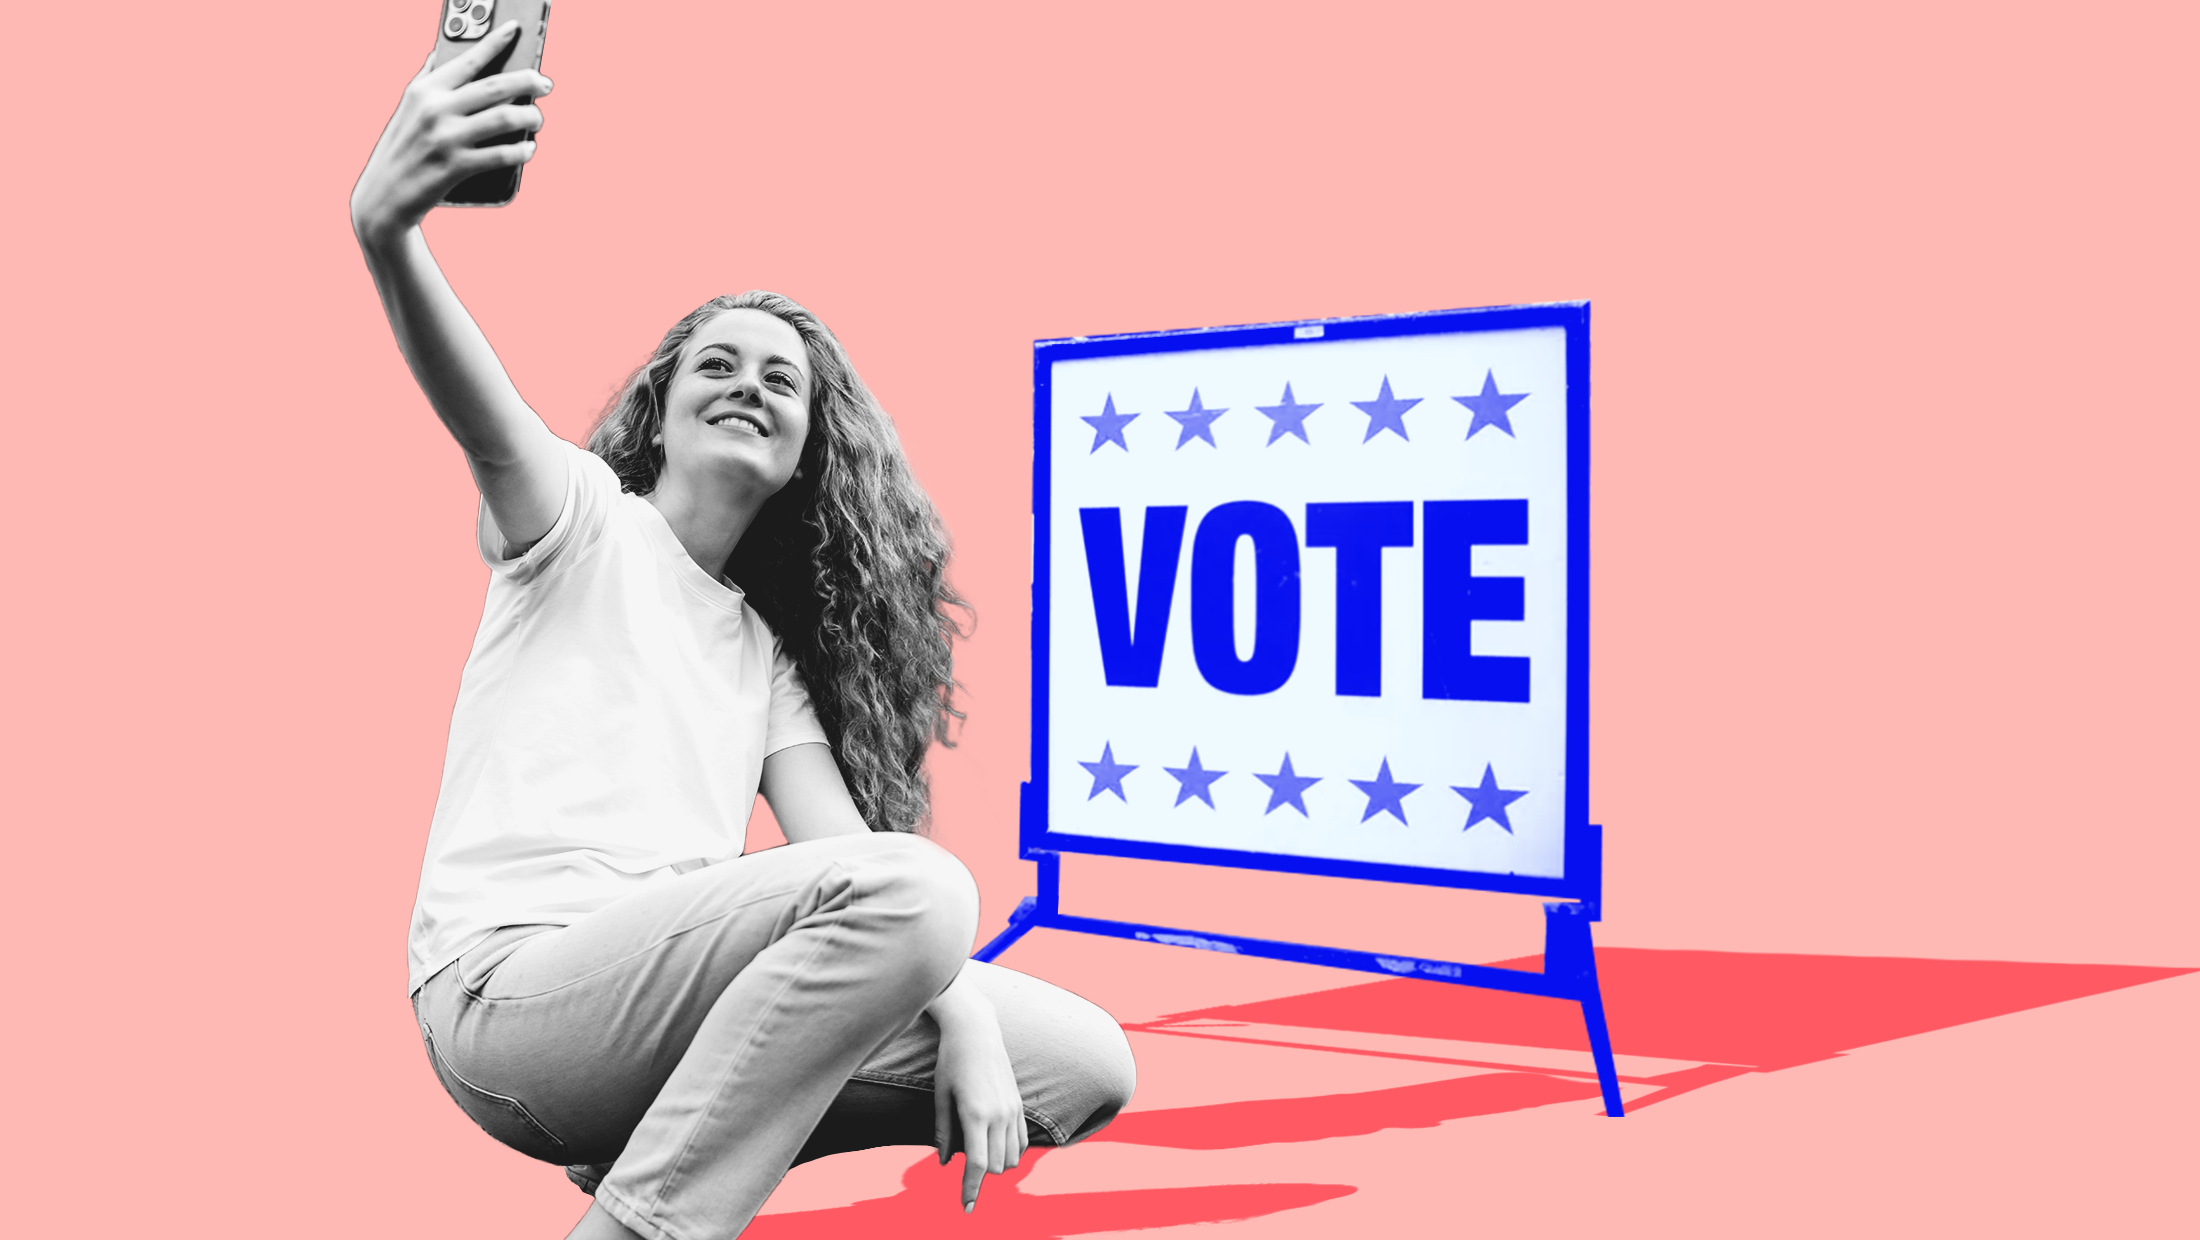 Red background with image of a young voter holding her phone up for a selfie in front of a blue-toned "Vote" sign.